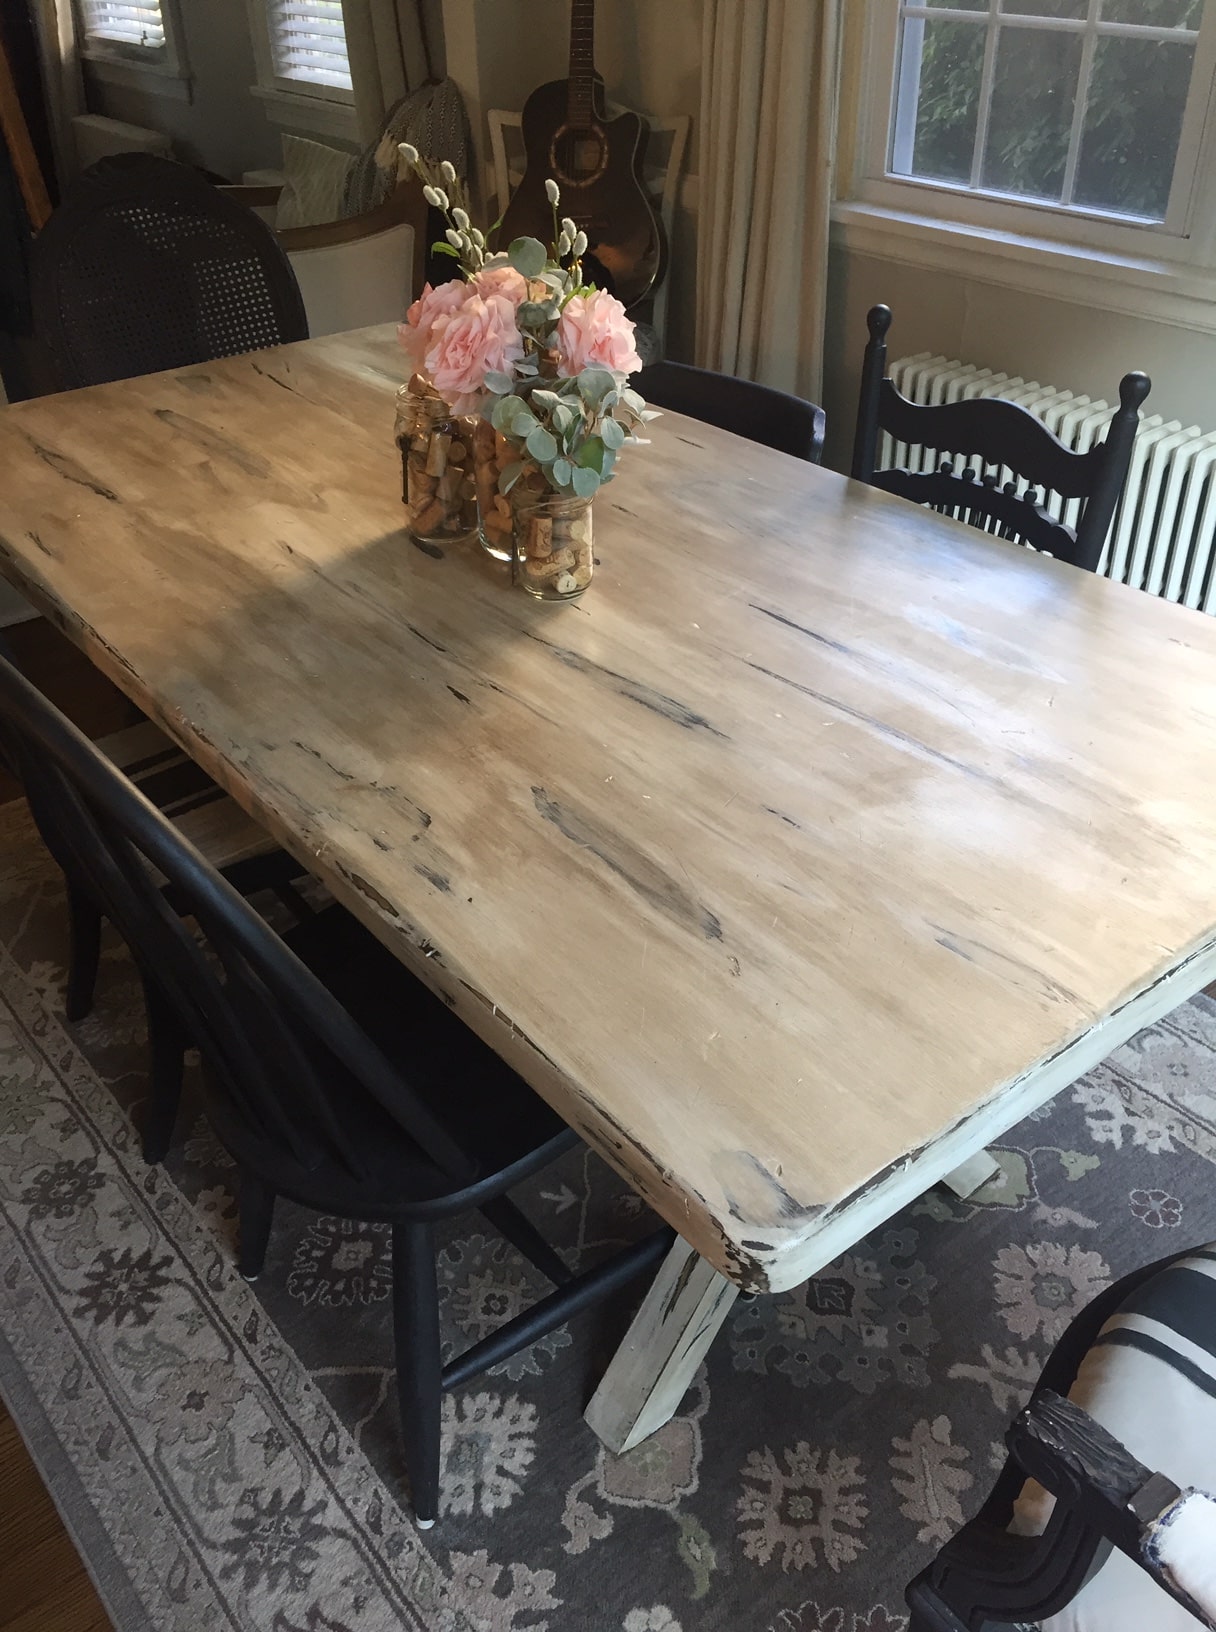 Chalk Paint Dining Room Table – Is it a Good Idea? - West ...
